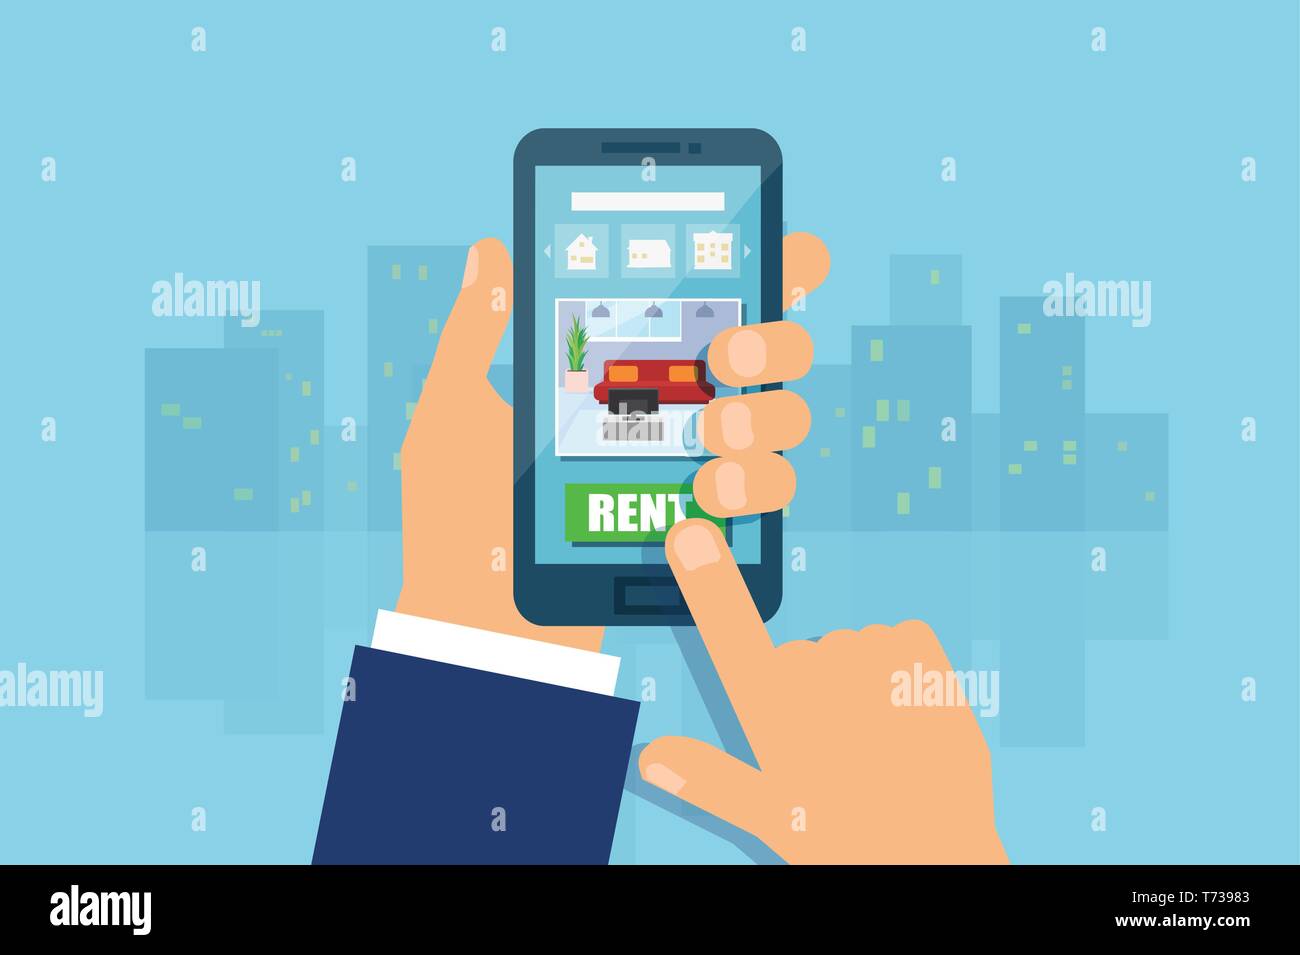 Apartment house rent using modern mobile technology. Vector of a man hand holding smartphone, touching screen making an apartment choice using smartph Stock Vector